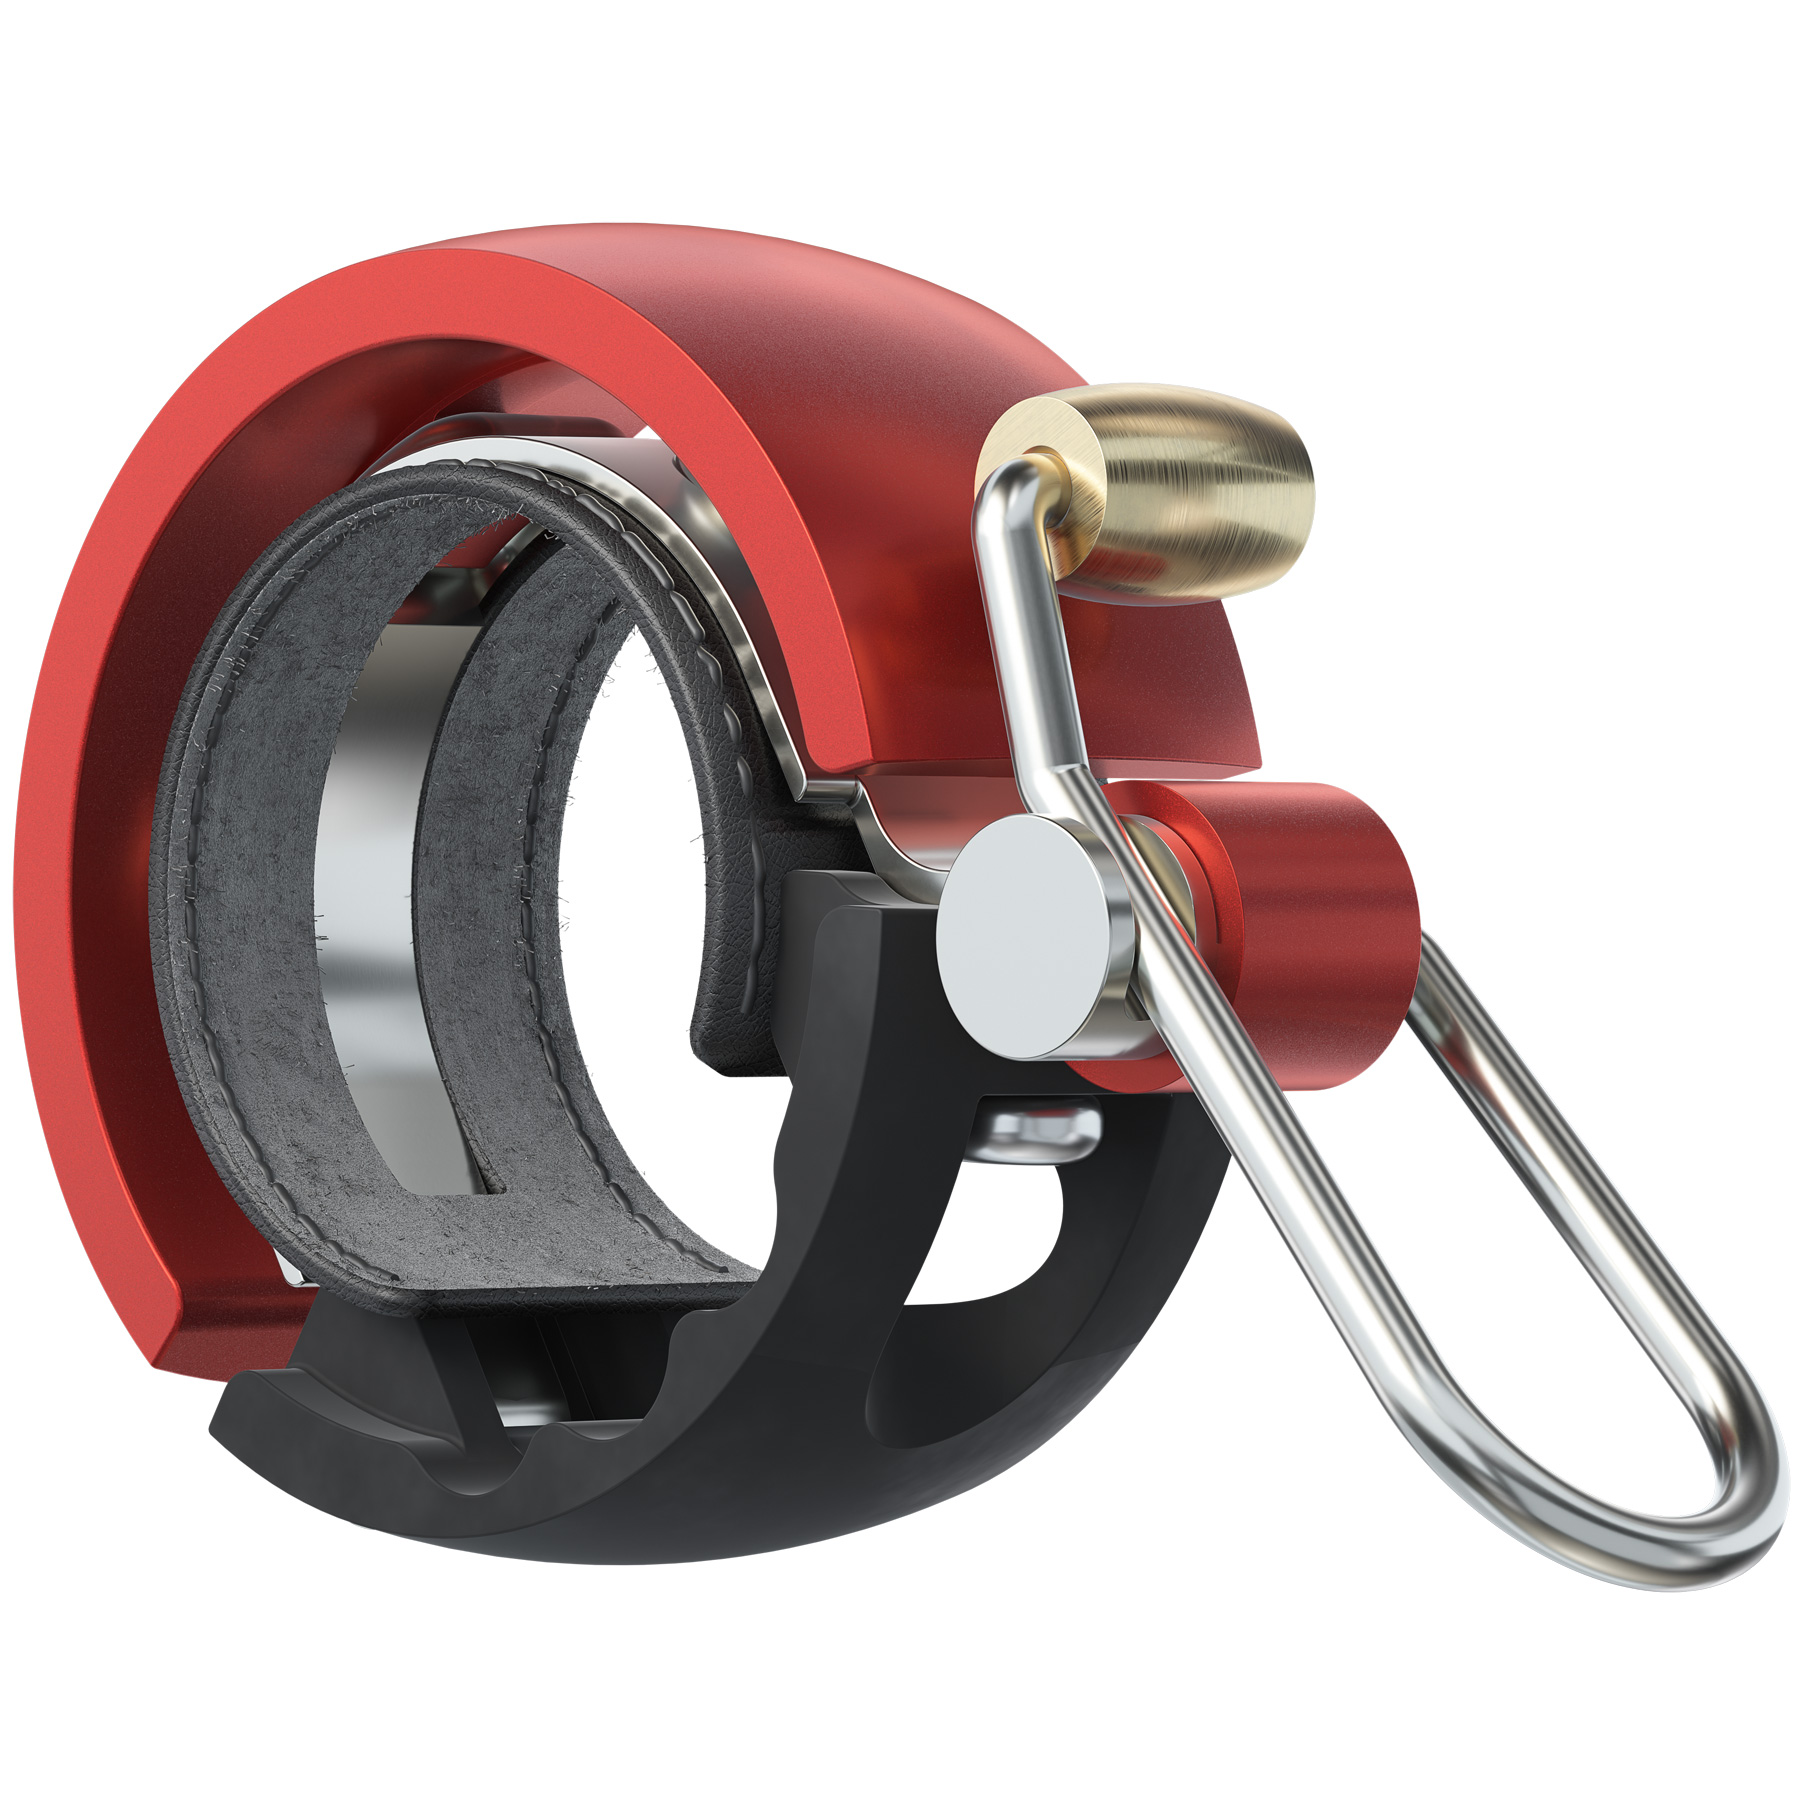 Productfoto van Knog Oi Luxe Bell - black/red